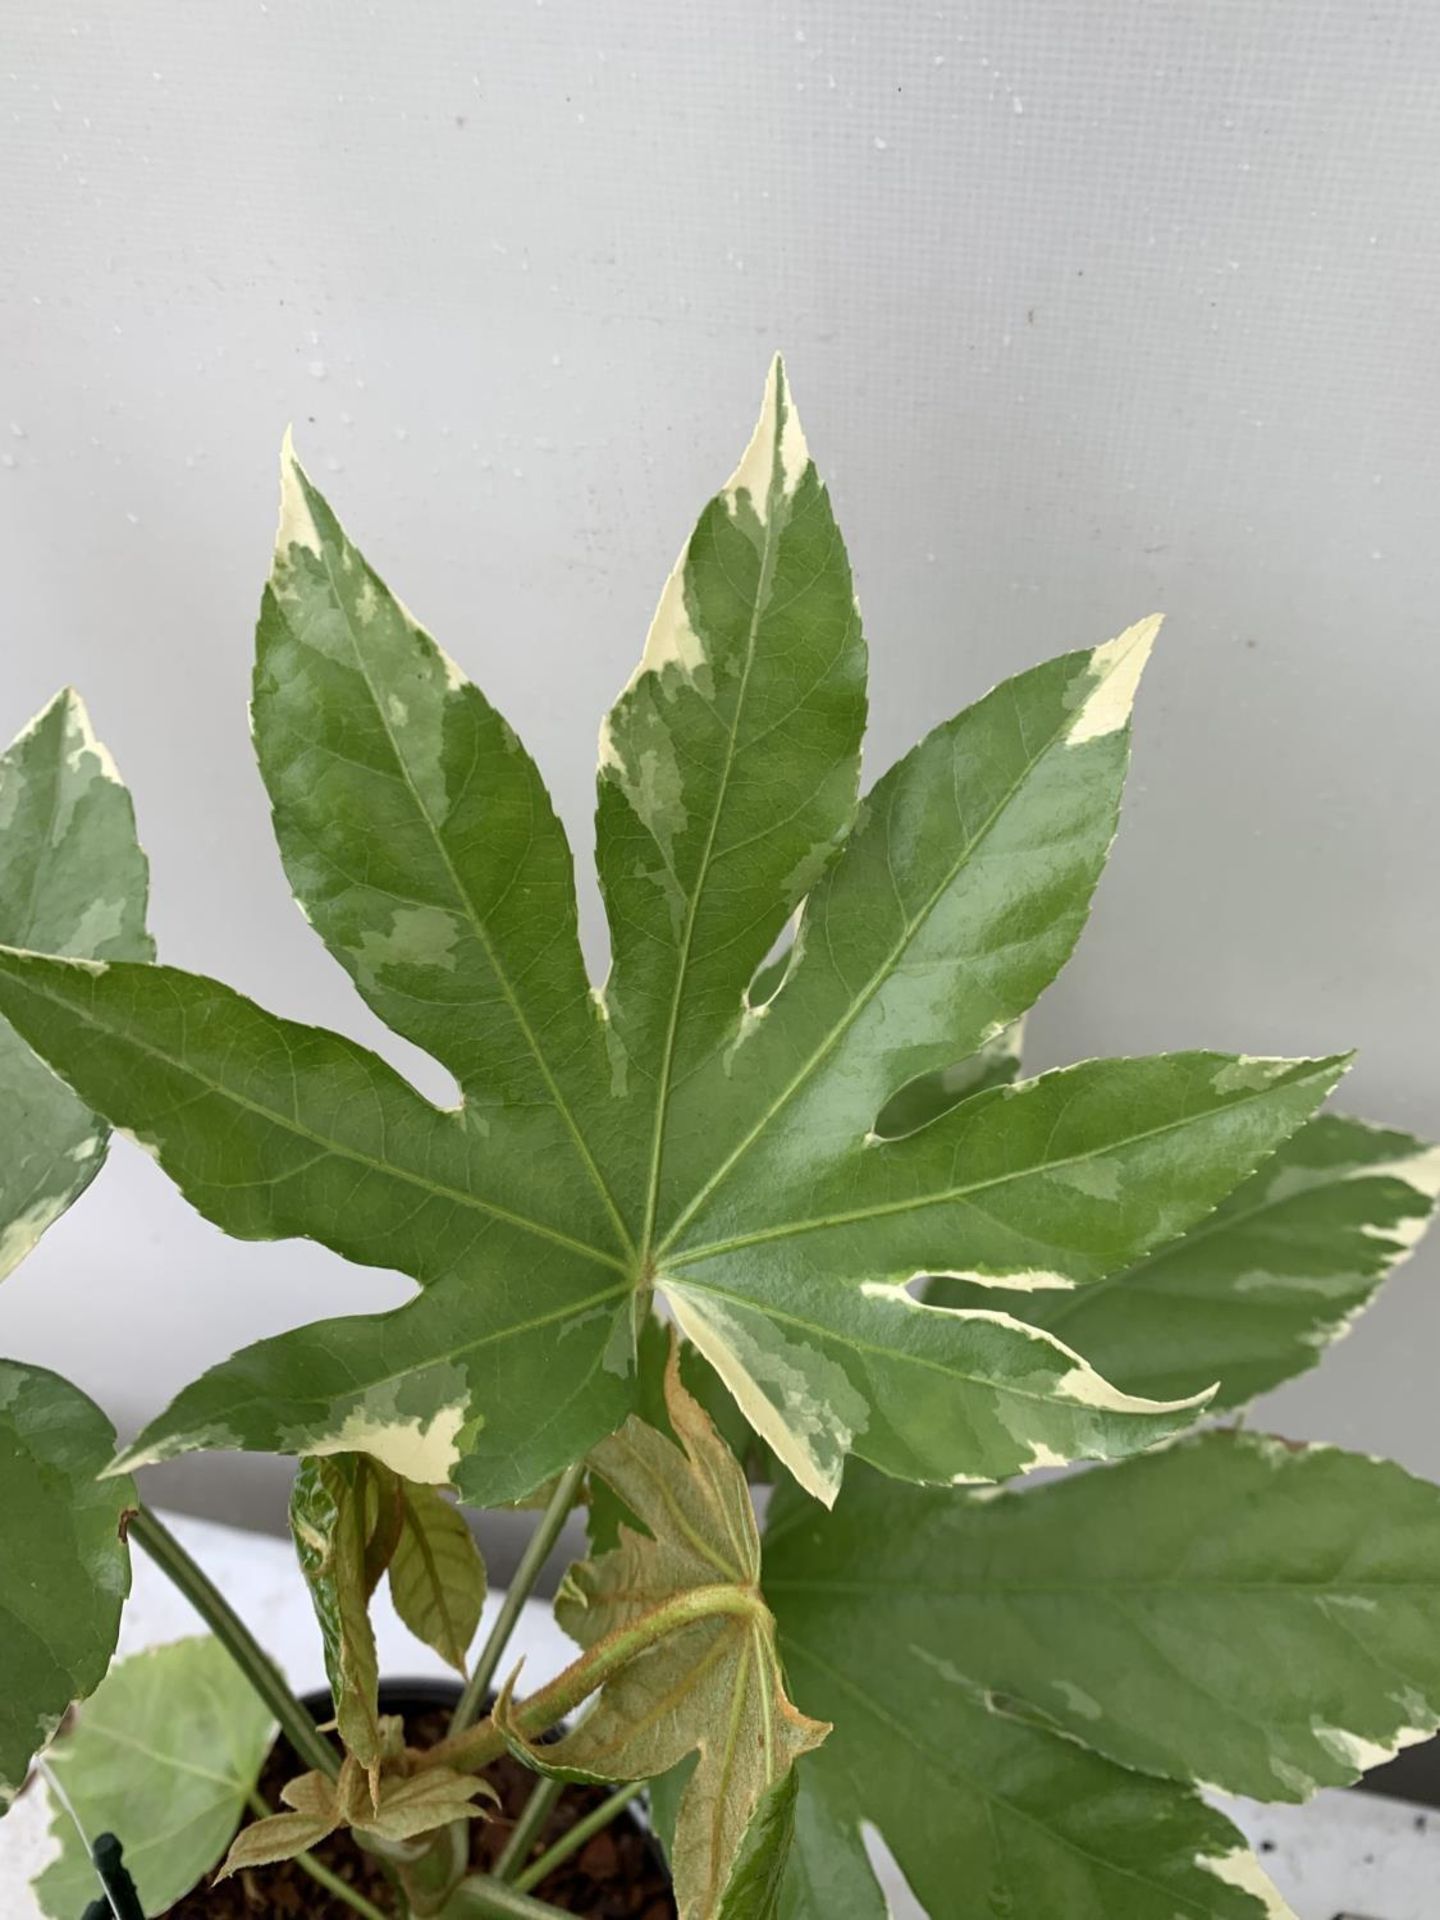 TWO FATSIA JAPONICA VARIEGATA AND FATSIA POLYCARPA 'GREEN FINGERS' IN 2 LTR POTS 50CM TALL PLUS - Image 15 of 16